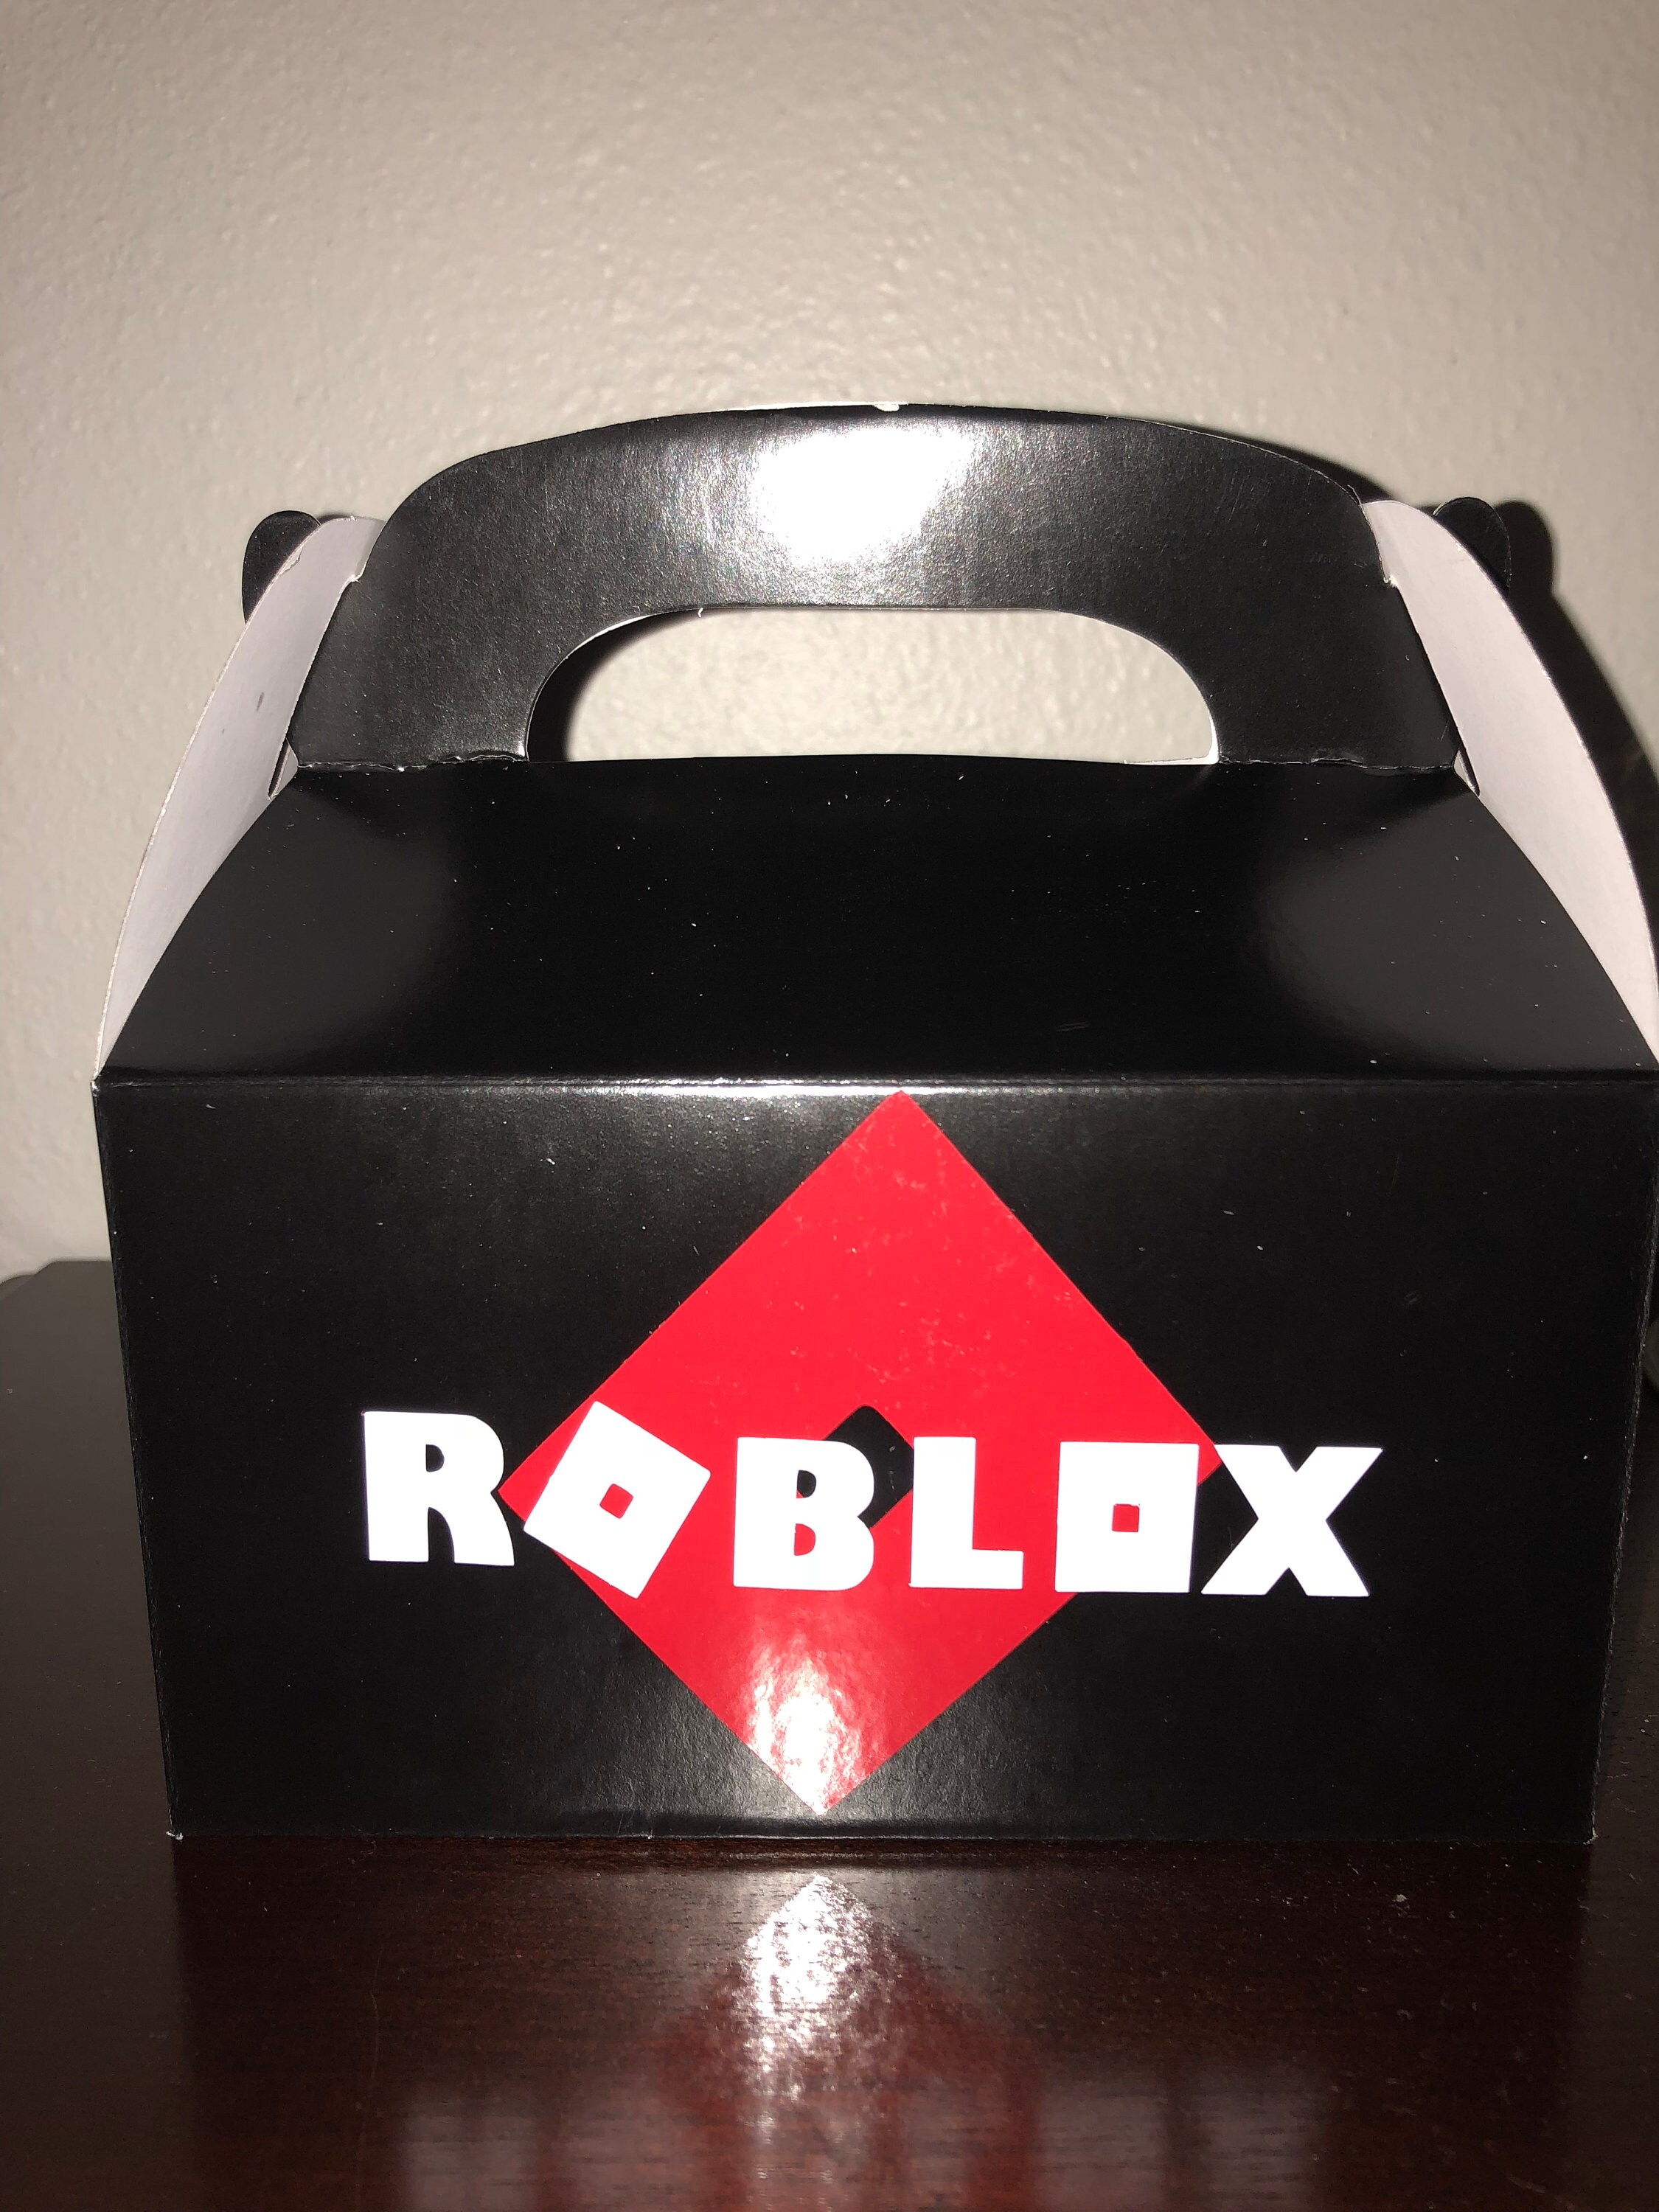 Roblox Party Favor Boxes Treat Goodie Bag Loot Box Birthday Etsy - roblox treat bags black red treat bags birthdays